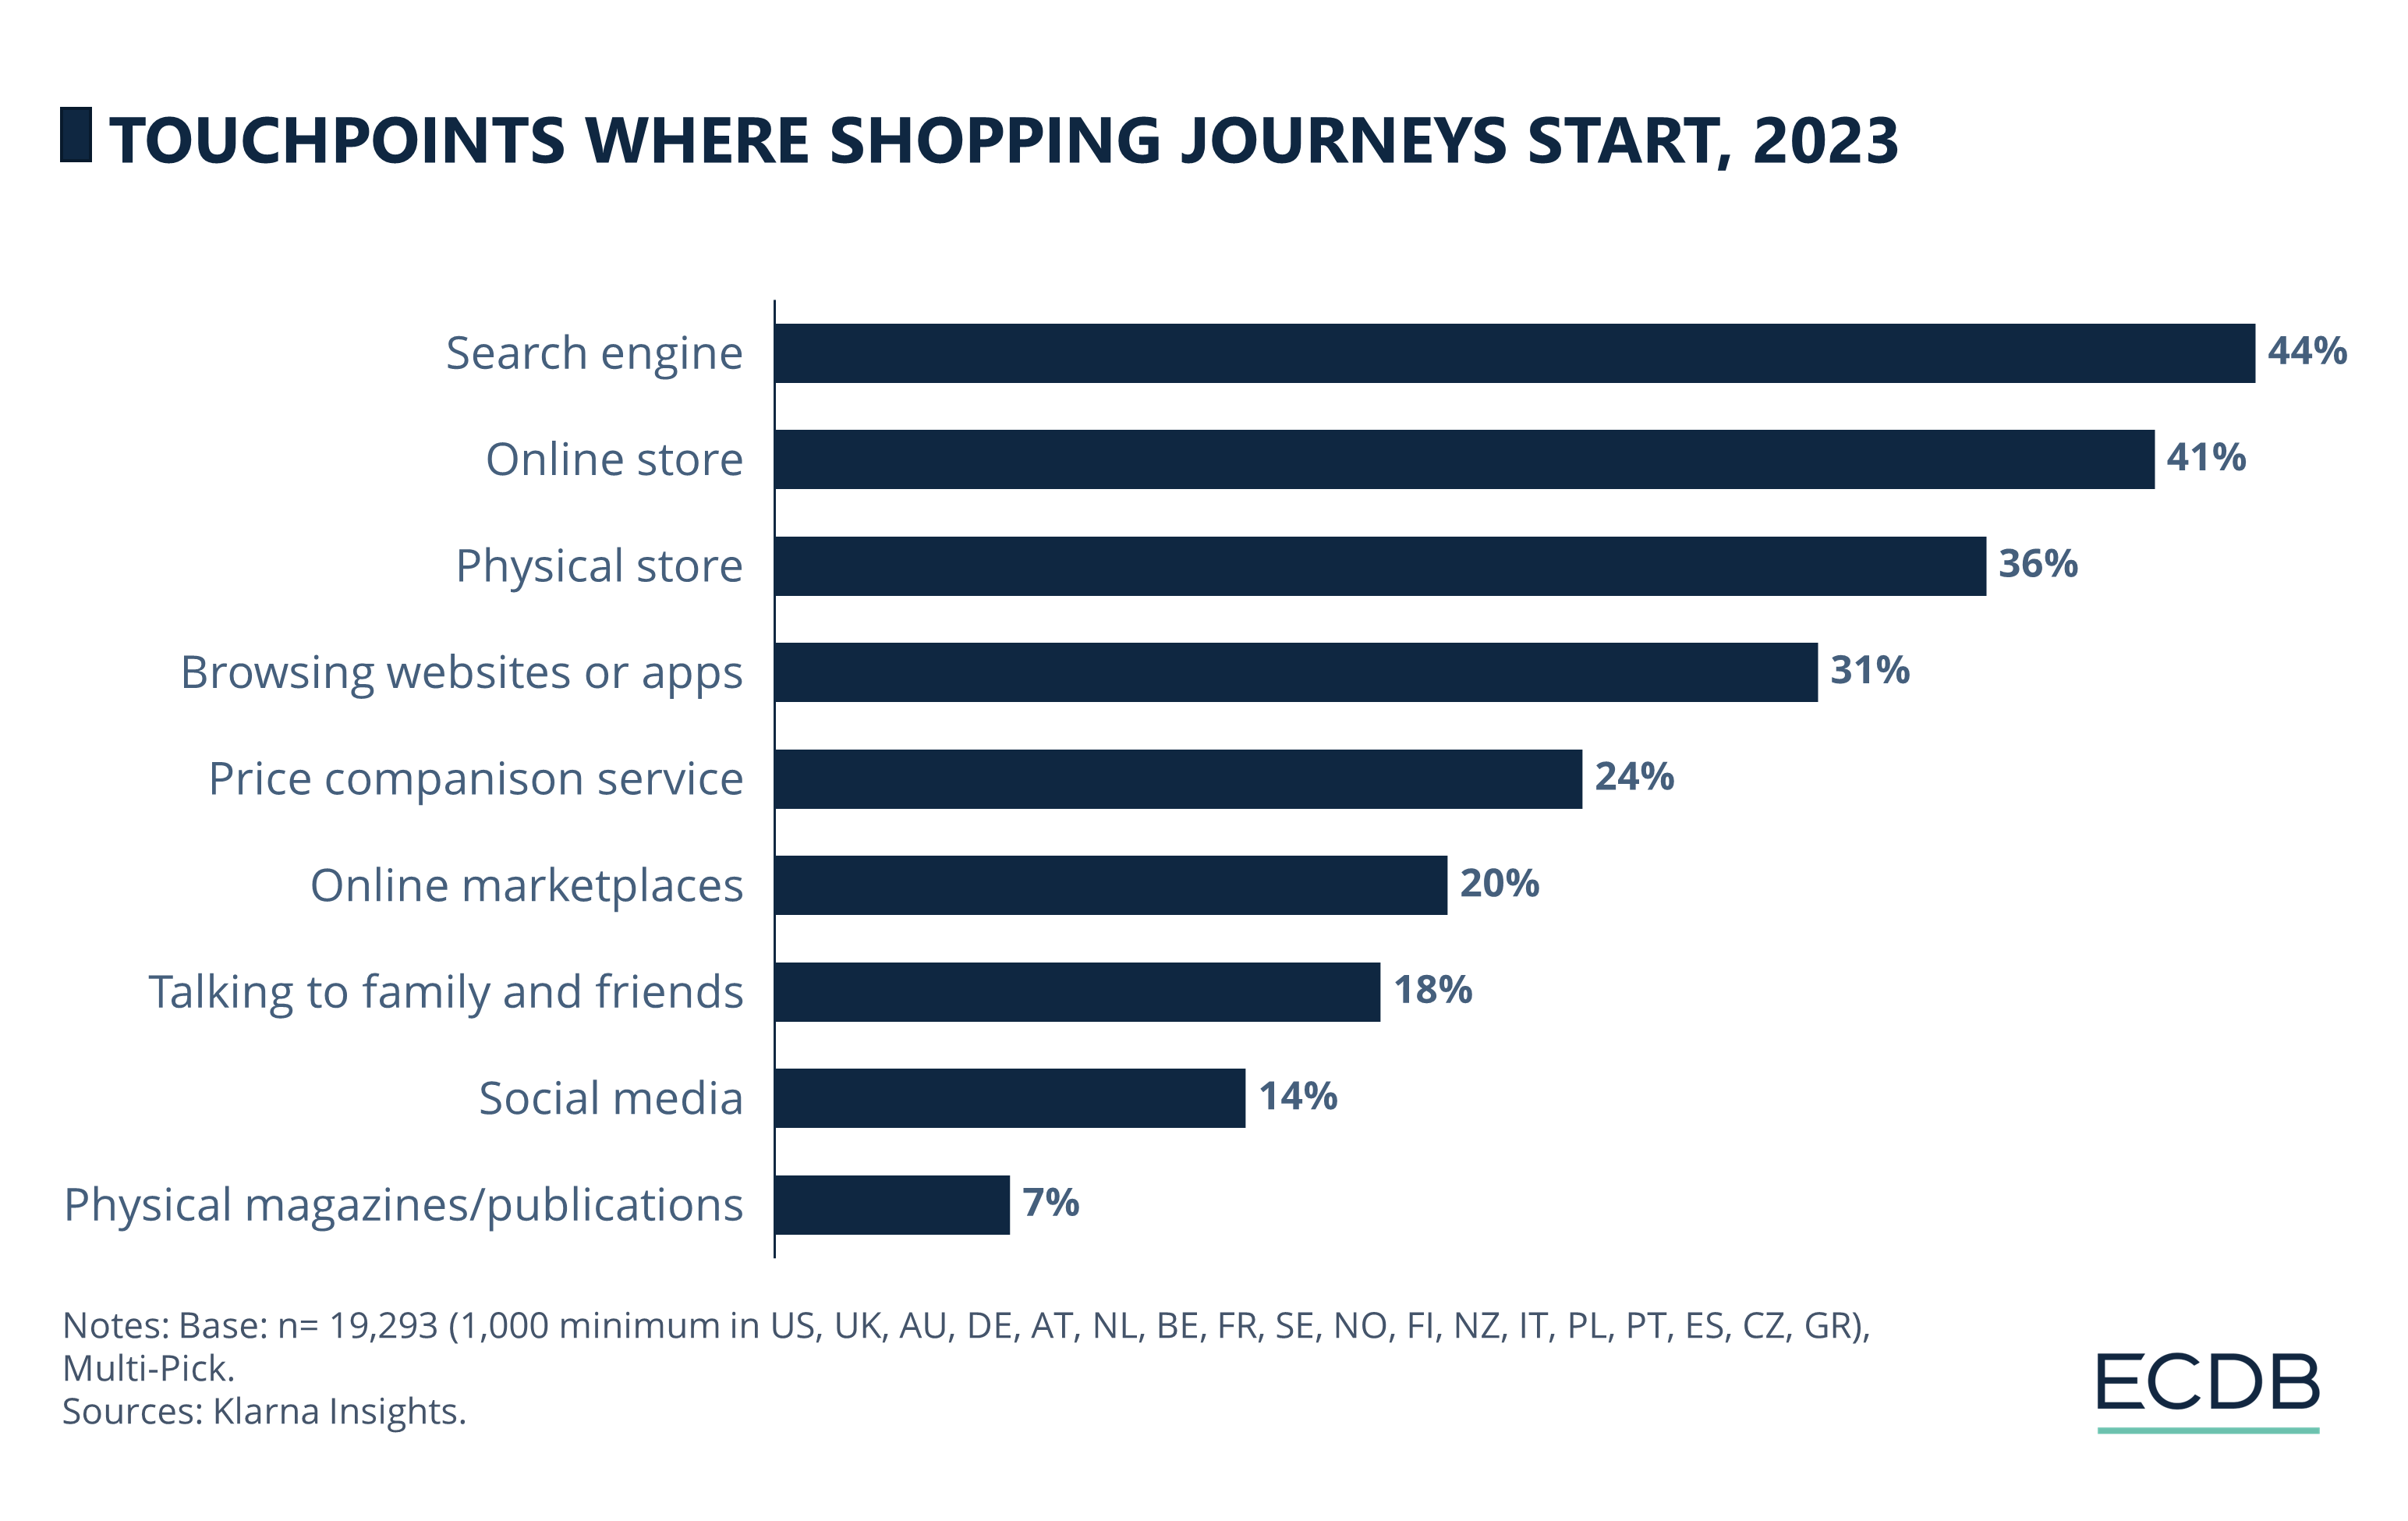 Touchpoints Where Shopping Journeys Start, 2023